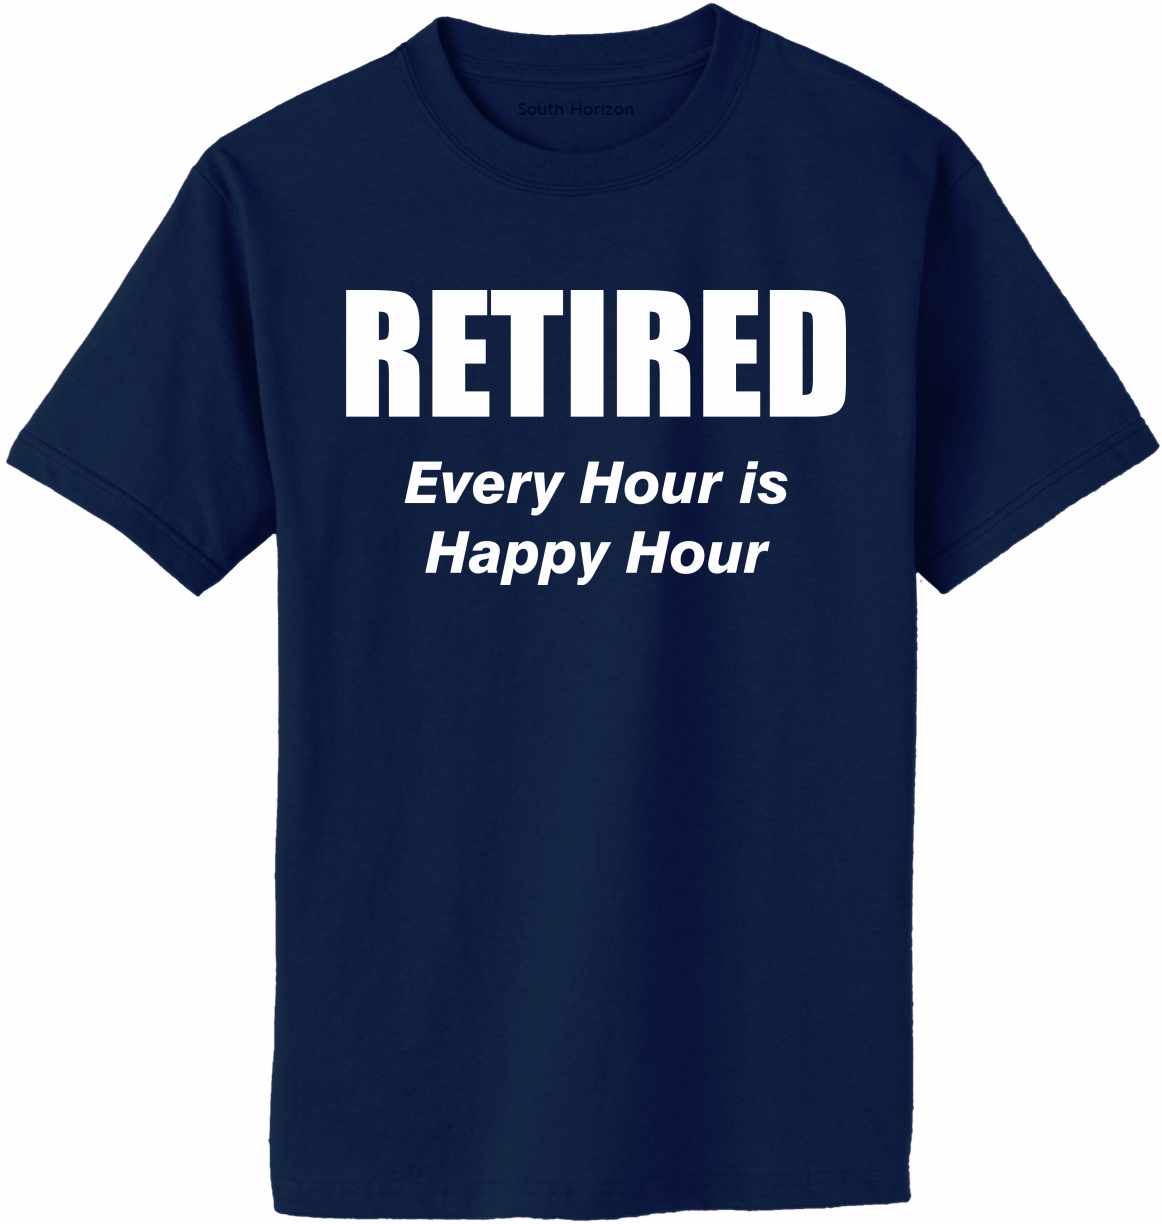 RETIRED, Every Hour Is Happy Hour Adult T-Shirt (#919-1)